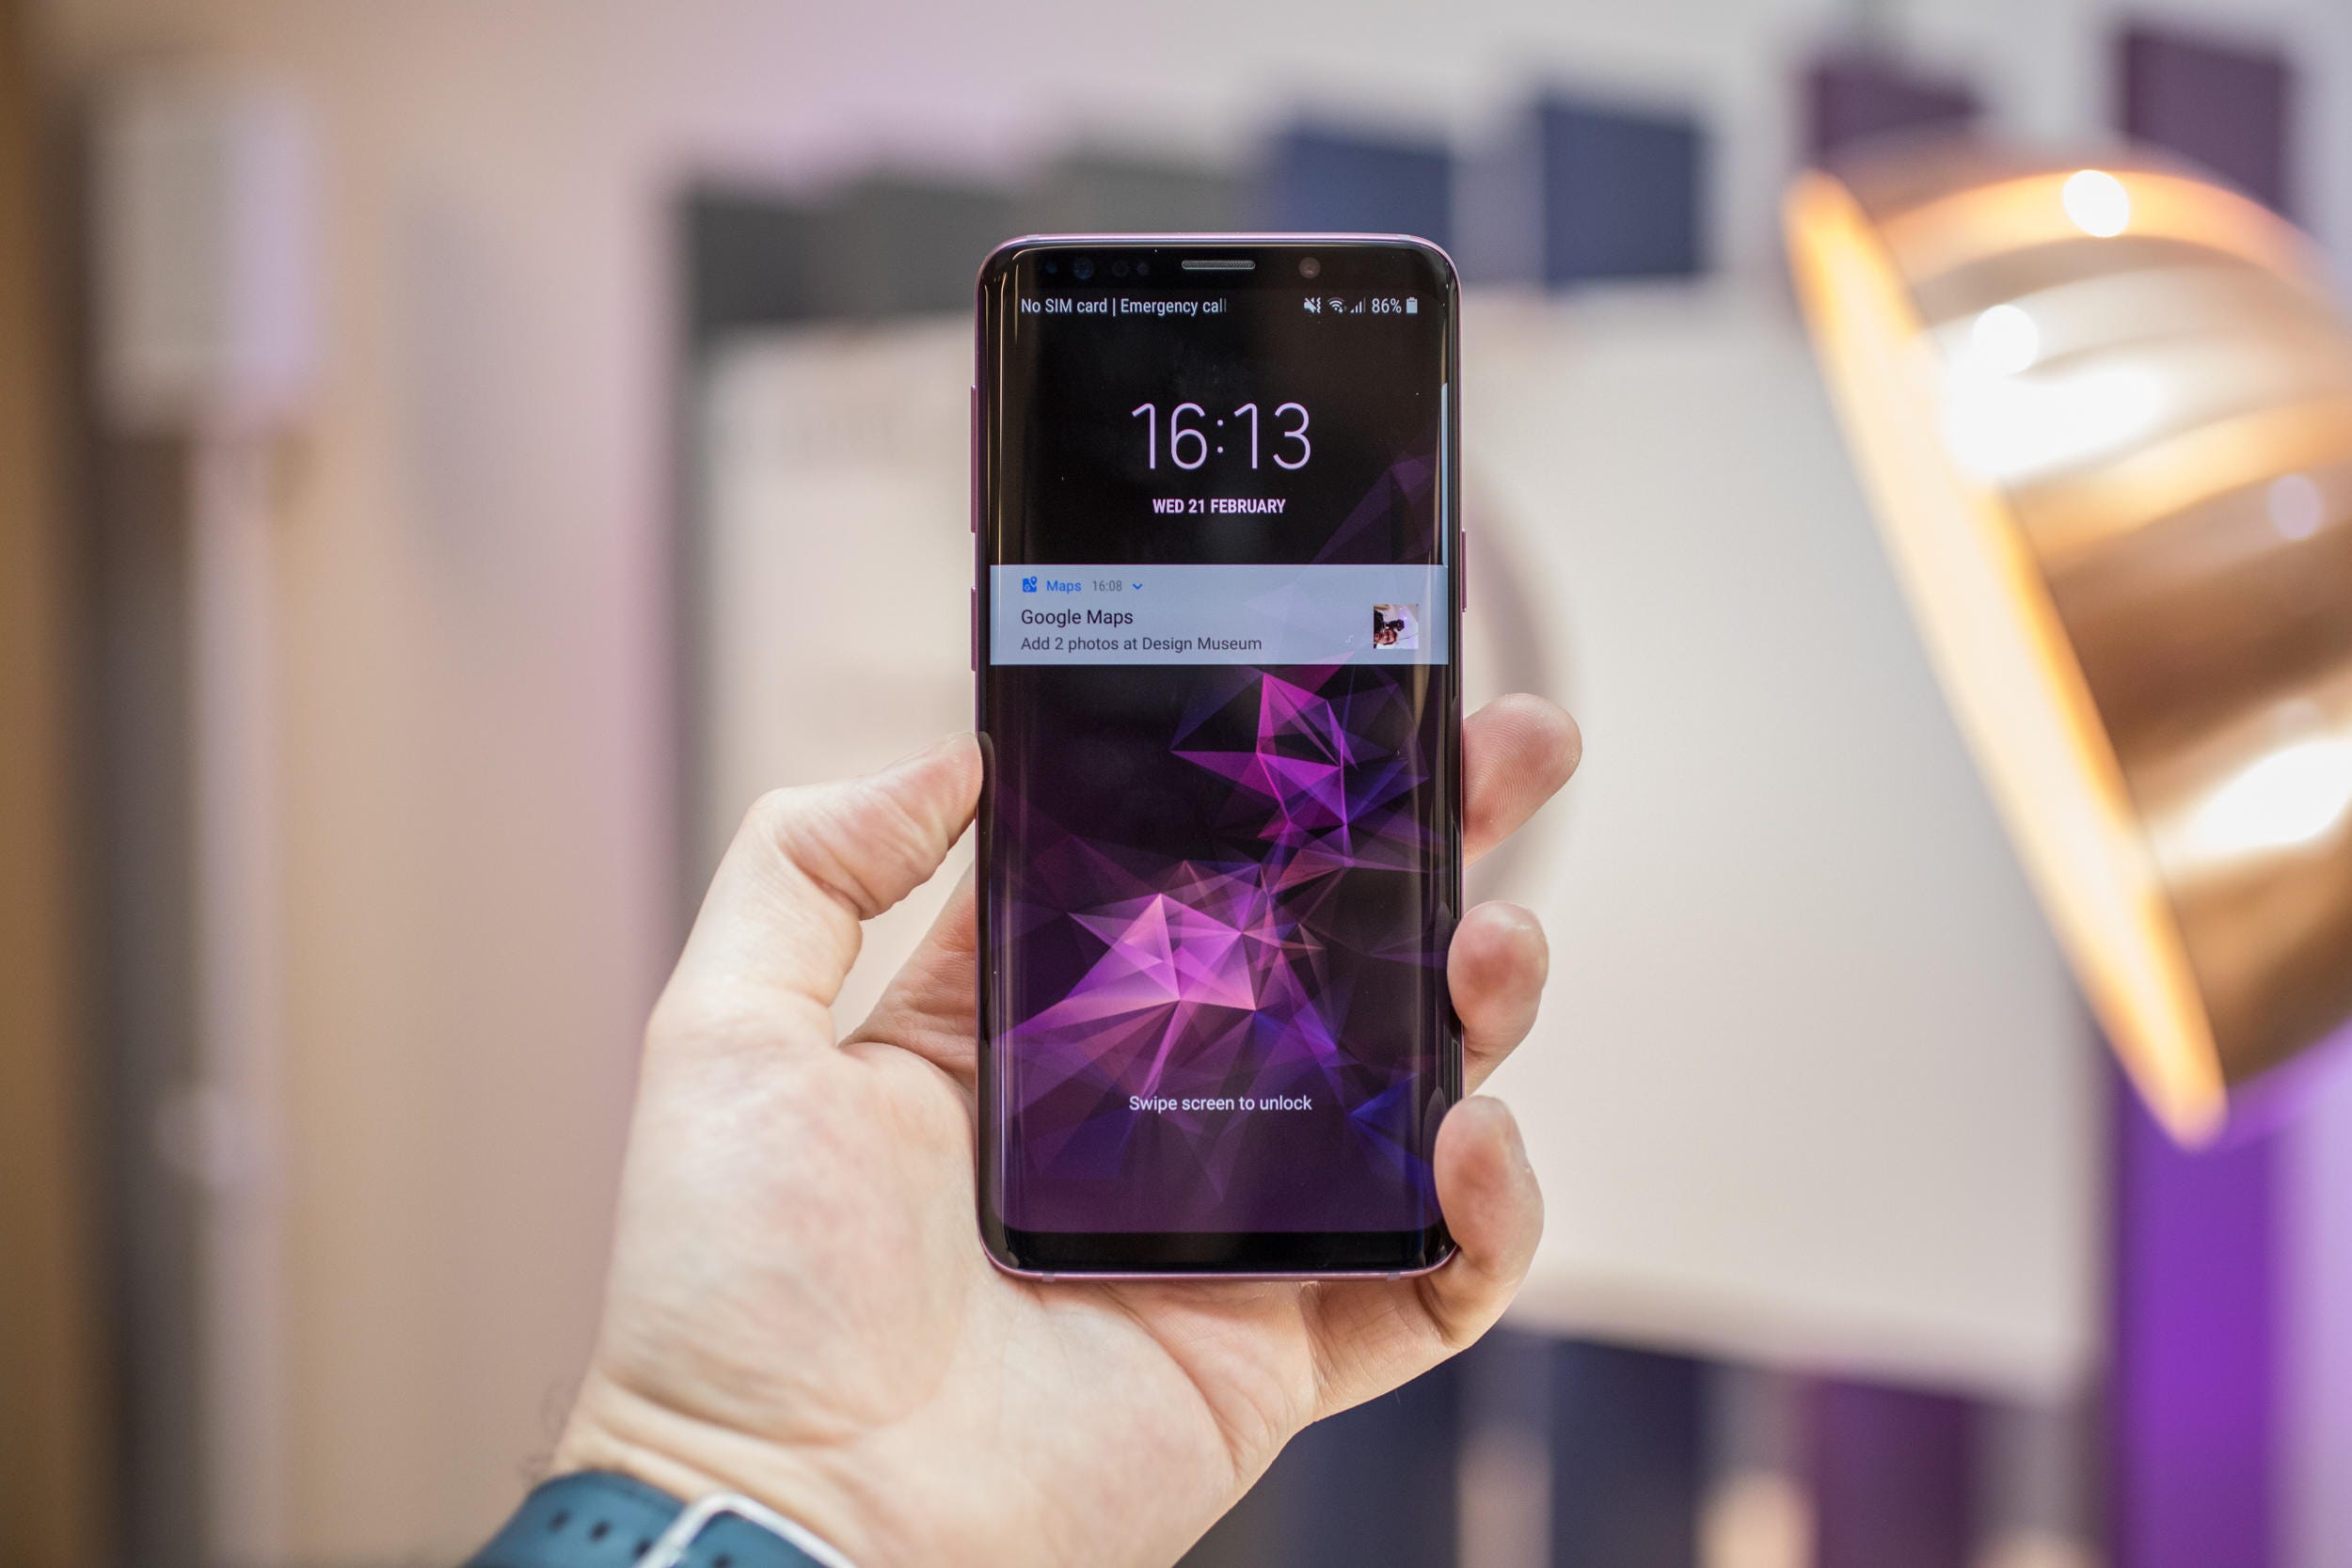 How to get the Galaxy S9 wallpapers on